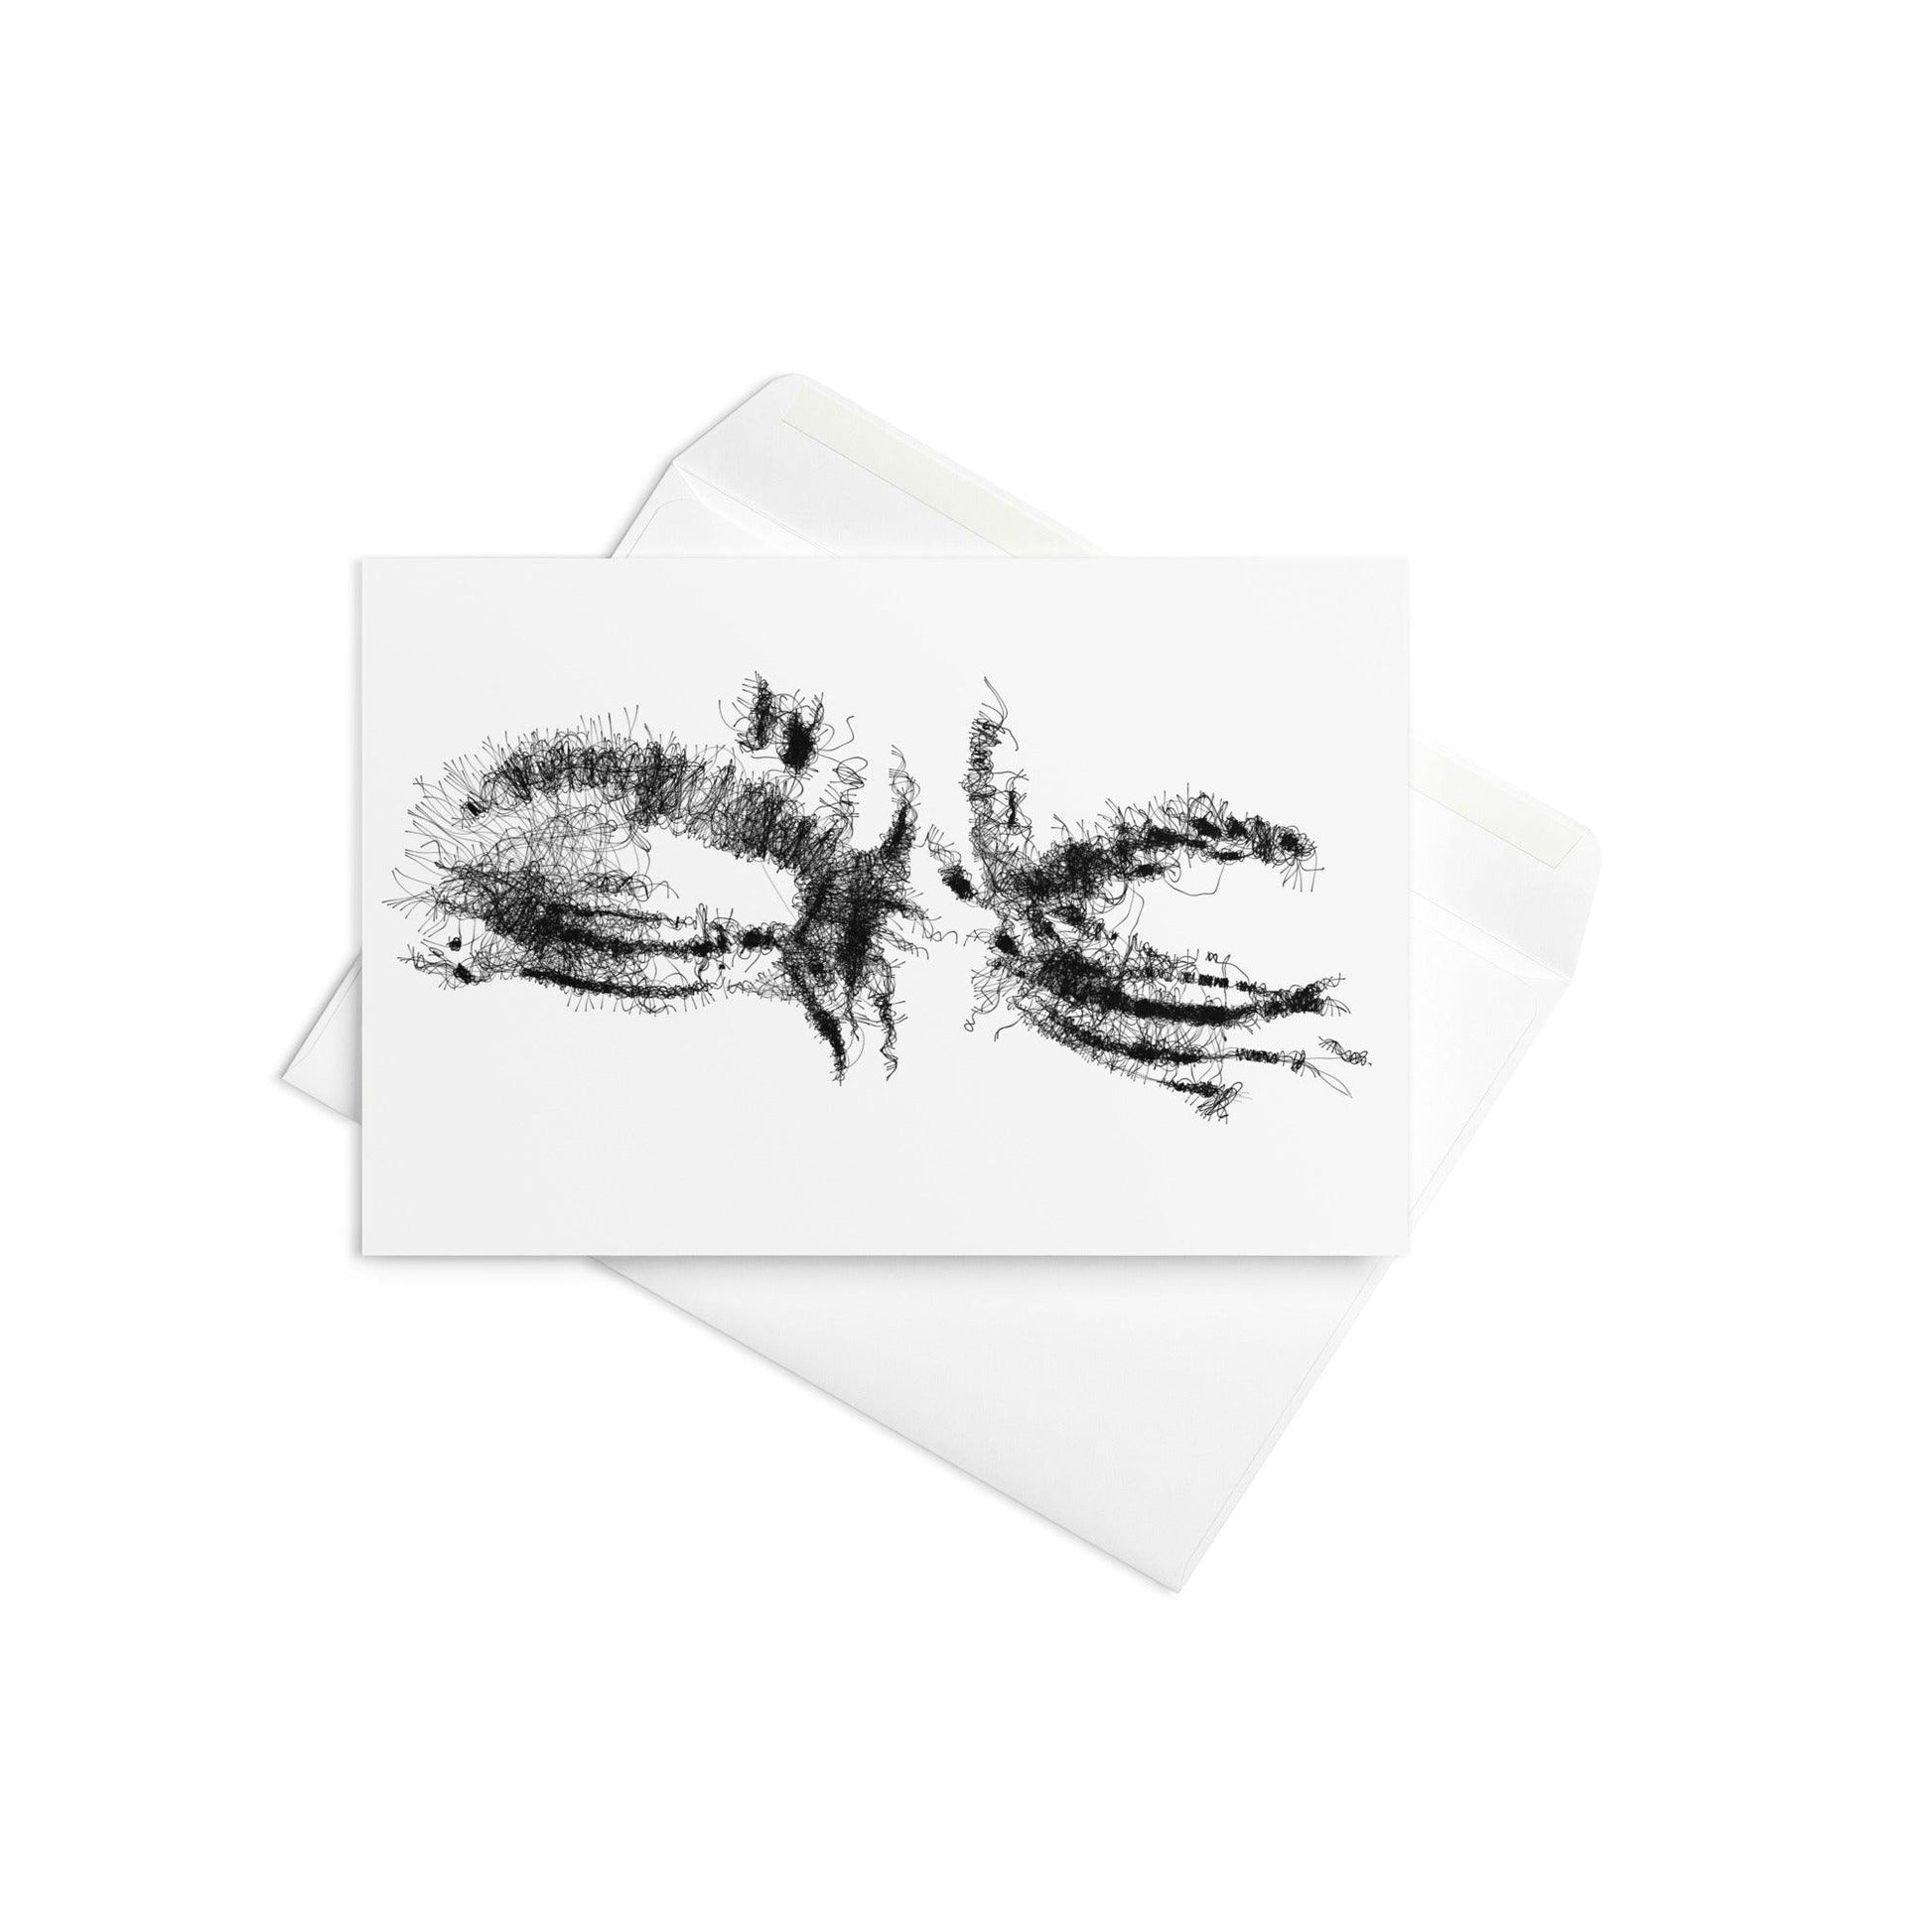 I Can’t Look - Note Card - iSAW Company